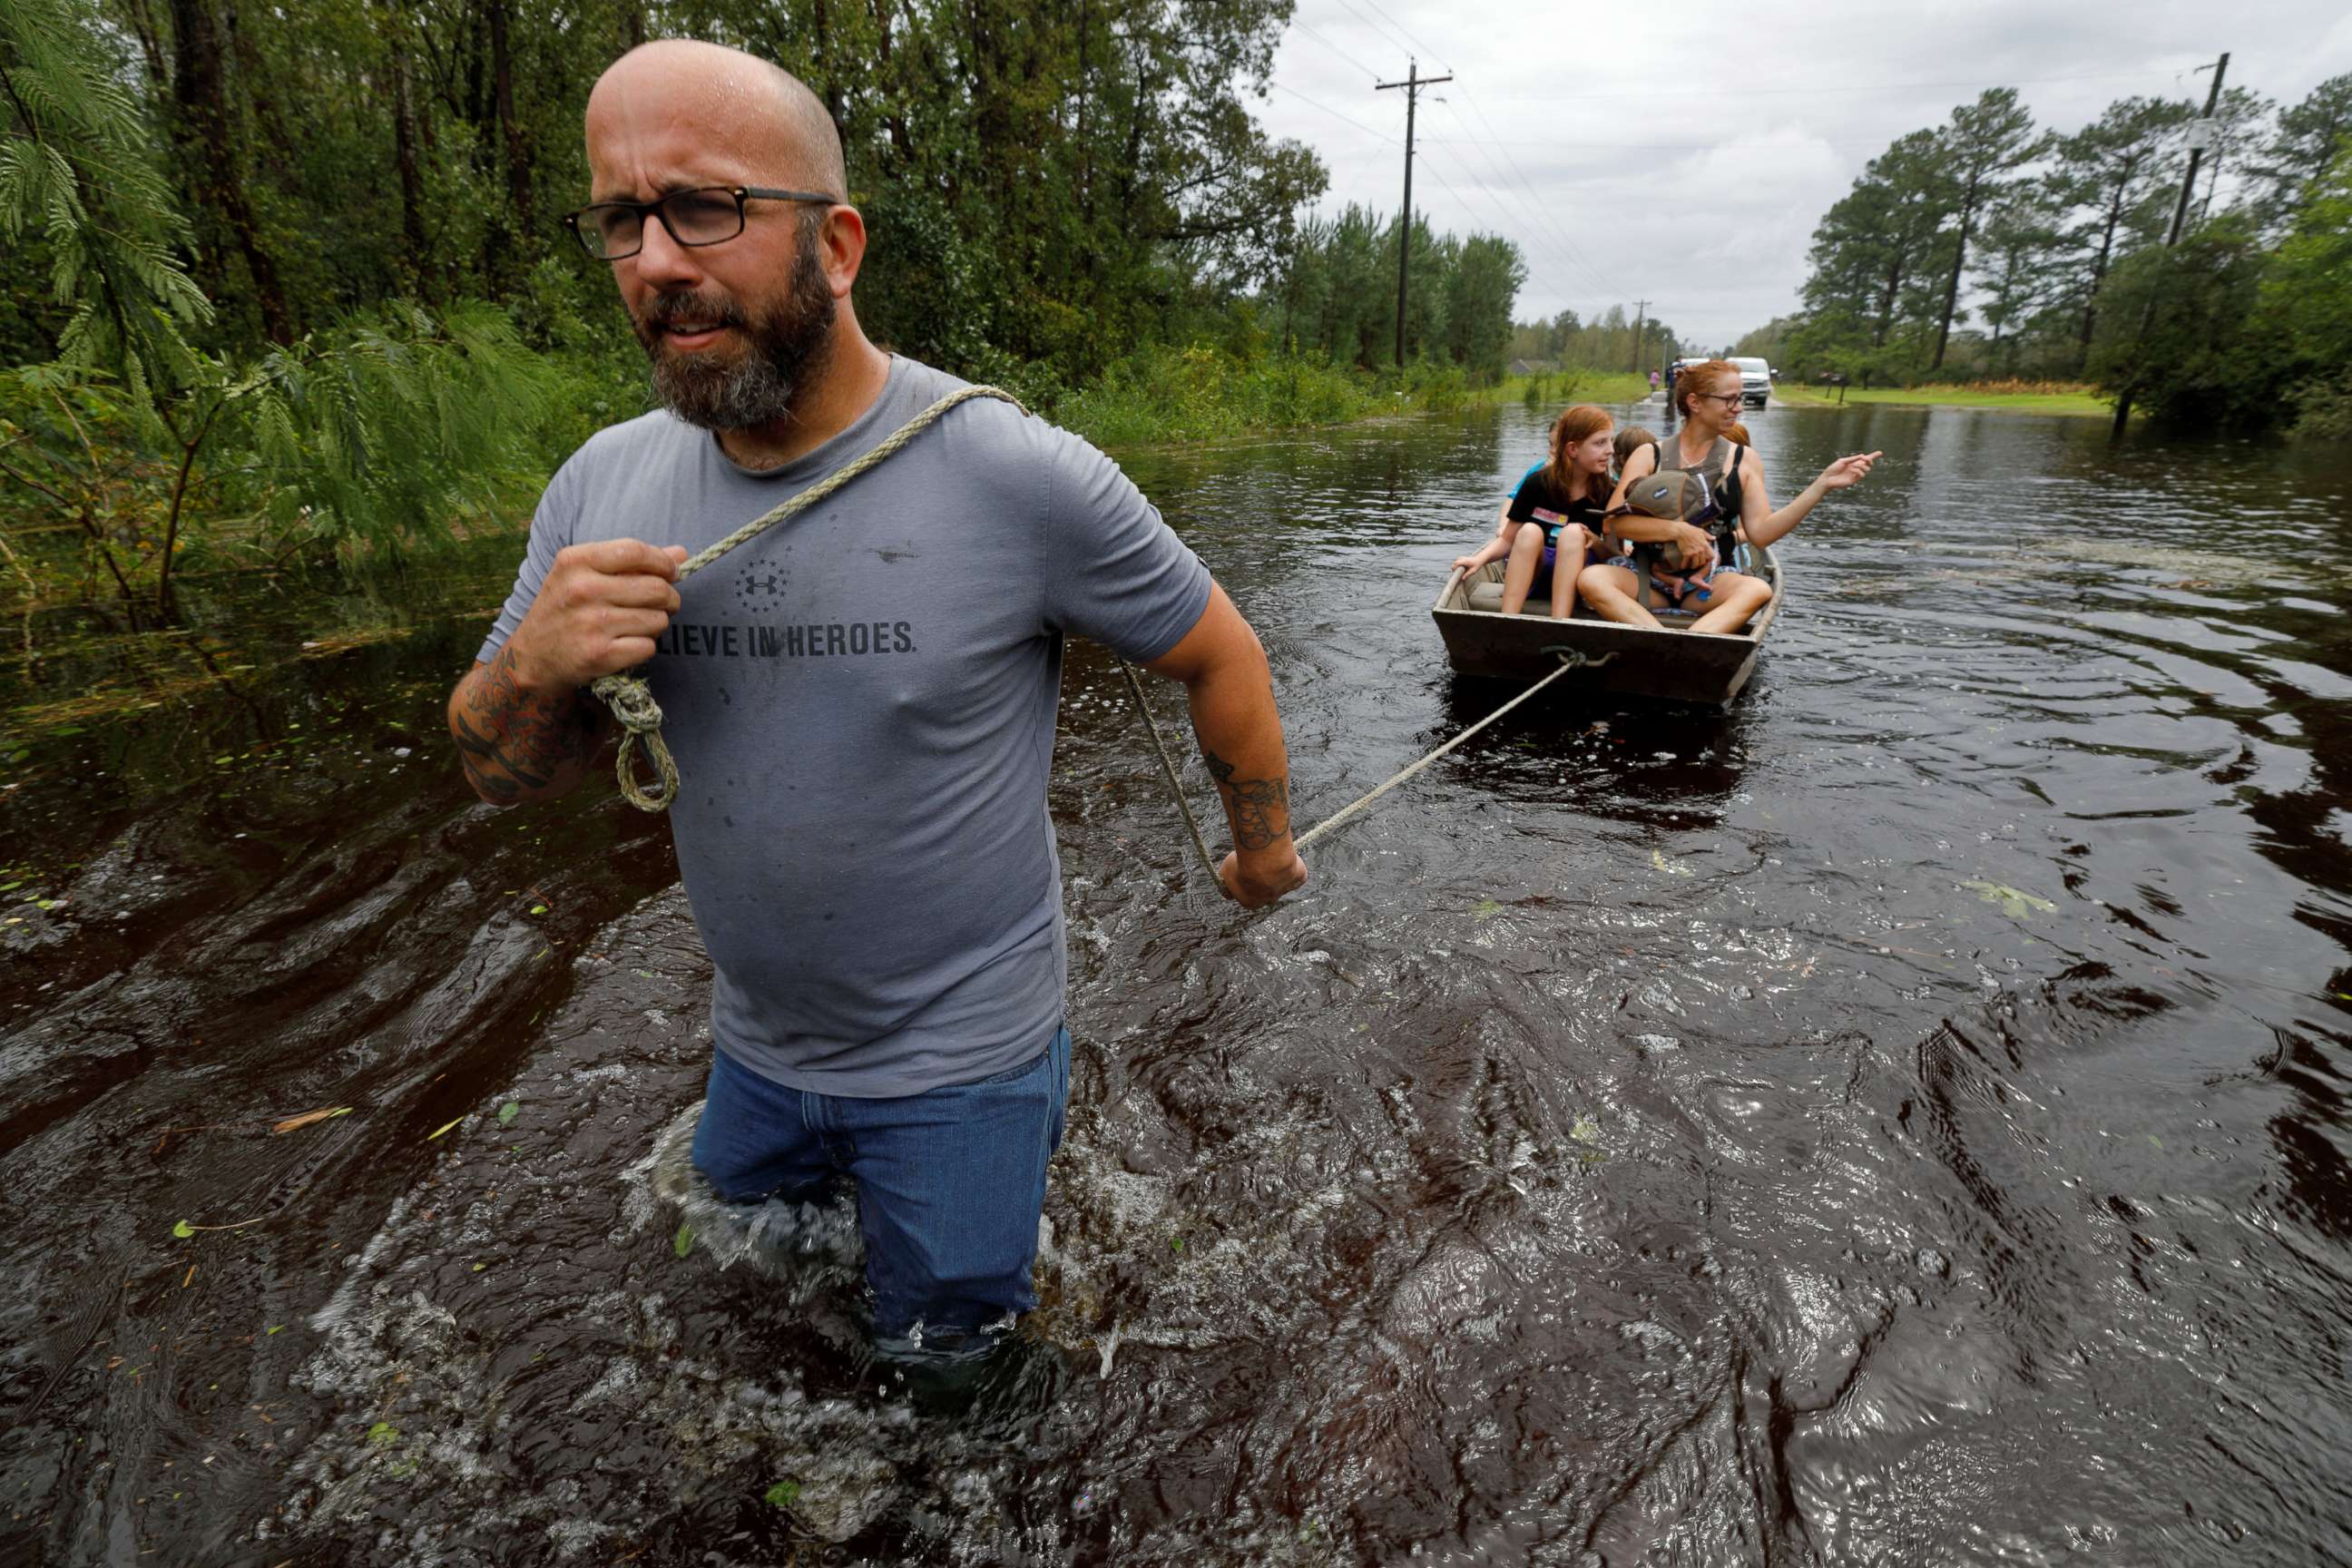 PHOTO: A volunteer from the community pulls a boat holding a mother and her children during their rescue from rising flood waters in the aftermath of Hurricane Florence, in Leland, N.C., Sept. 16, 2018.